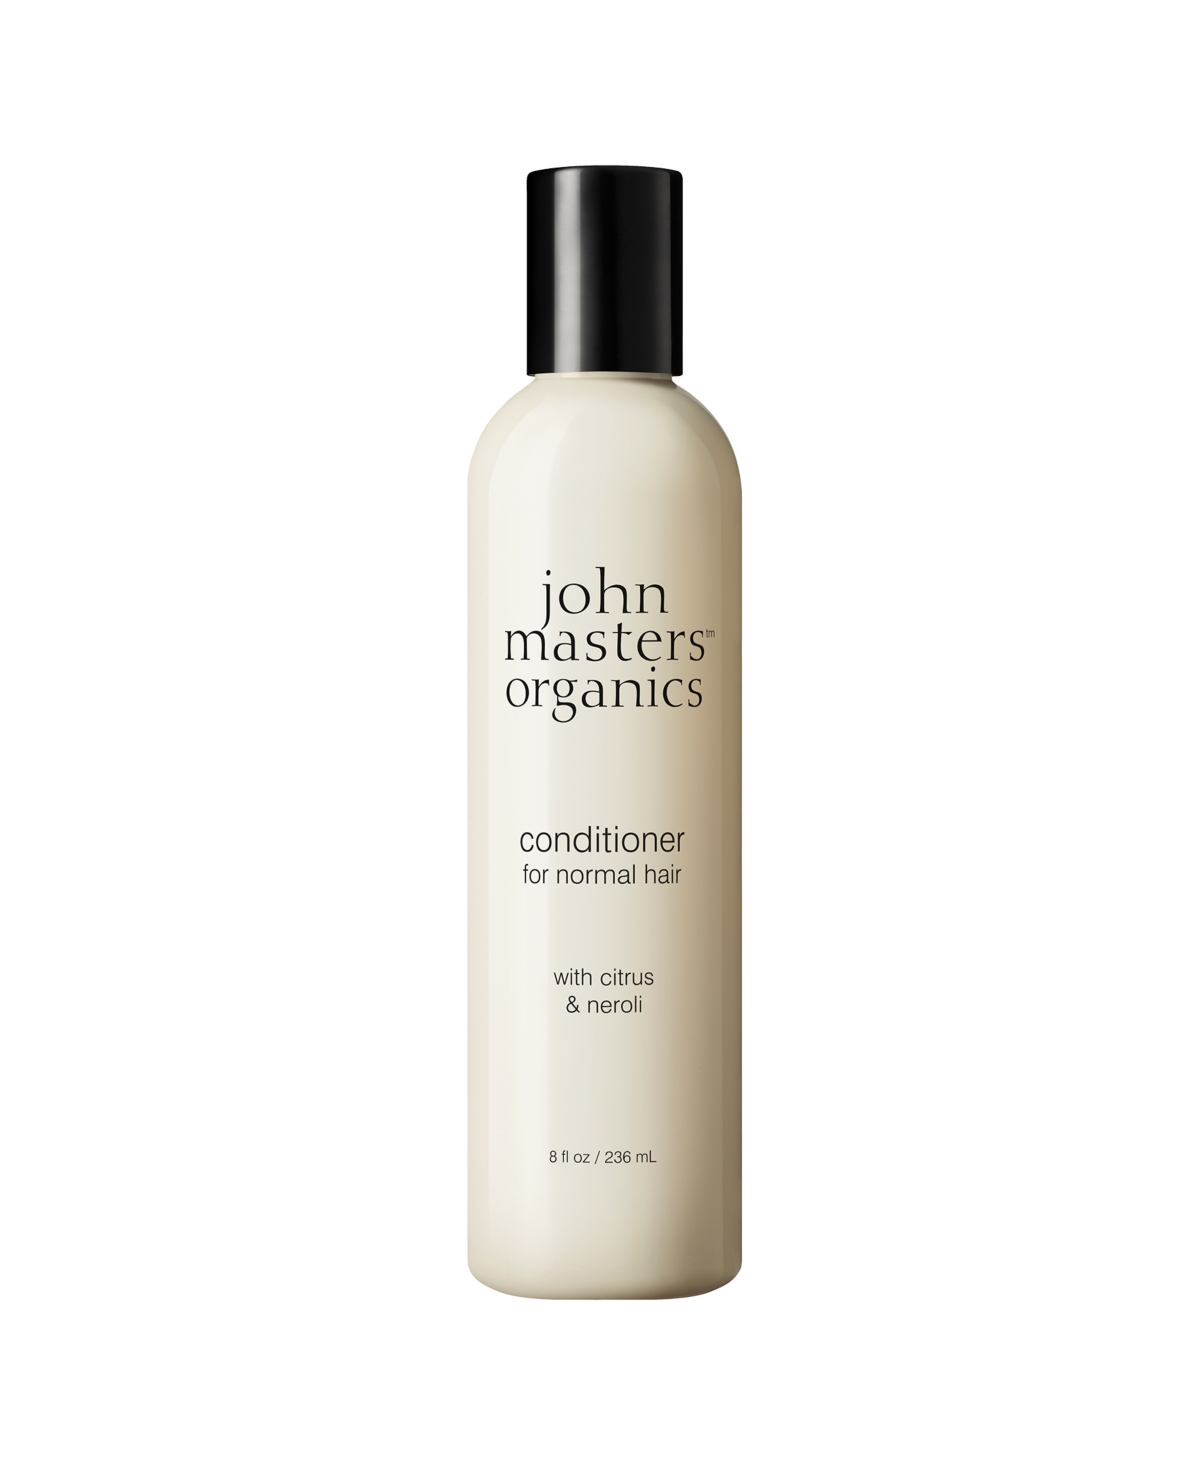 Conditioner For Normal Hair With Citrus & Neroli, 8 oz.